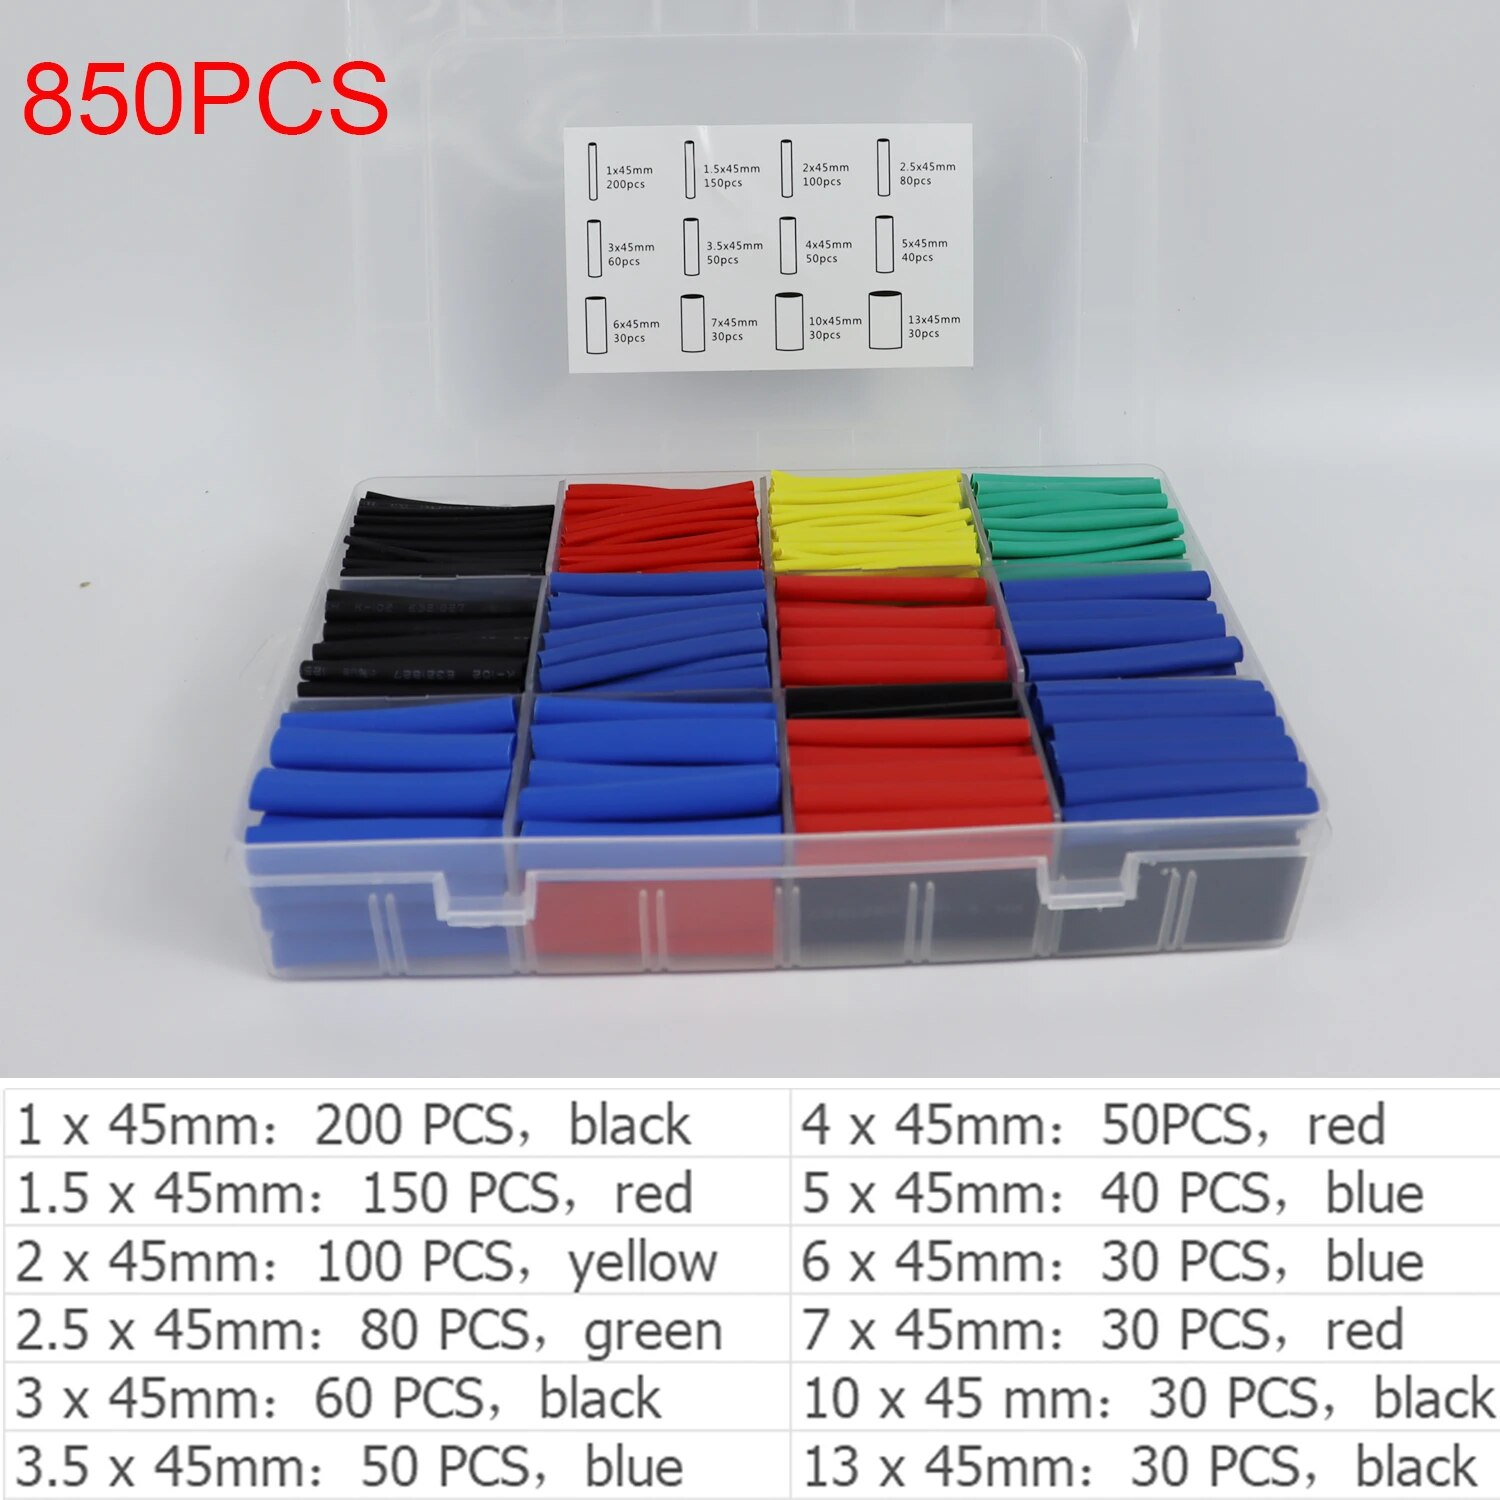 850pcs Heat Shrink Tubing 2:1 5 Color Electrical Wire Cable Wrap Kit 12 Sizes Heat Shrink Tube Assortment with Storage Case